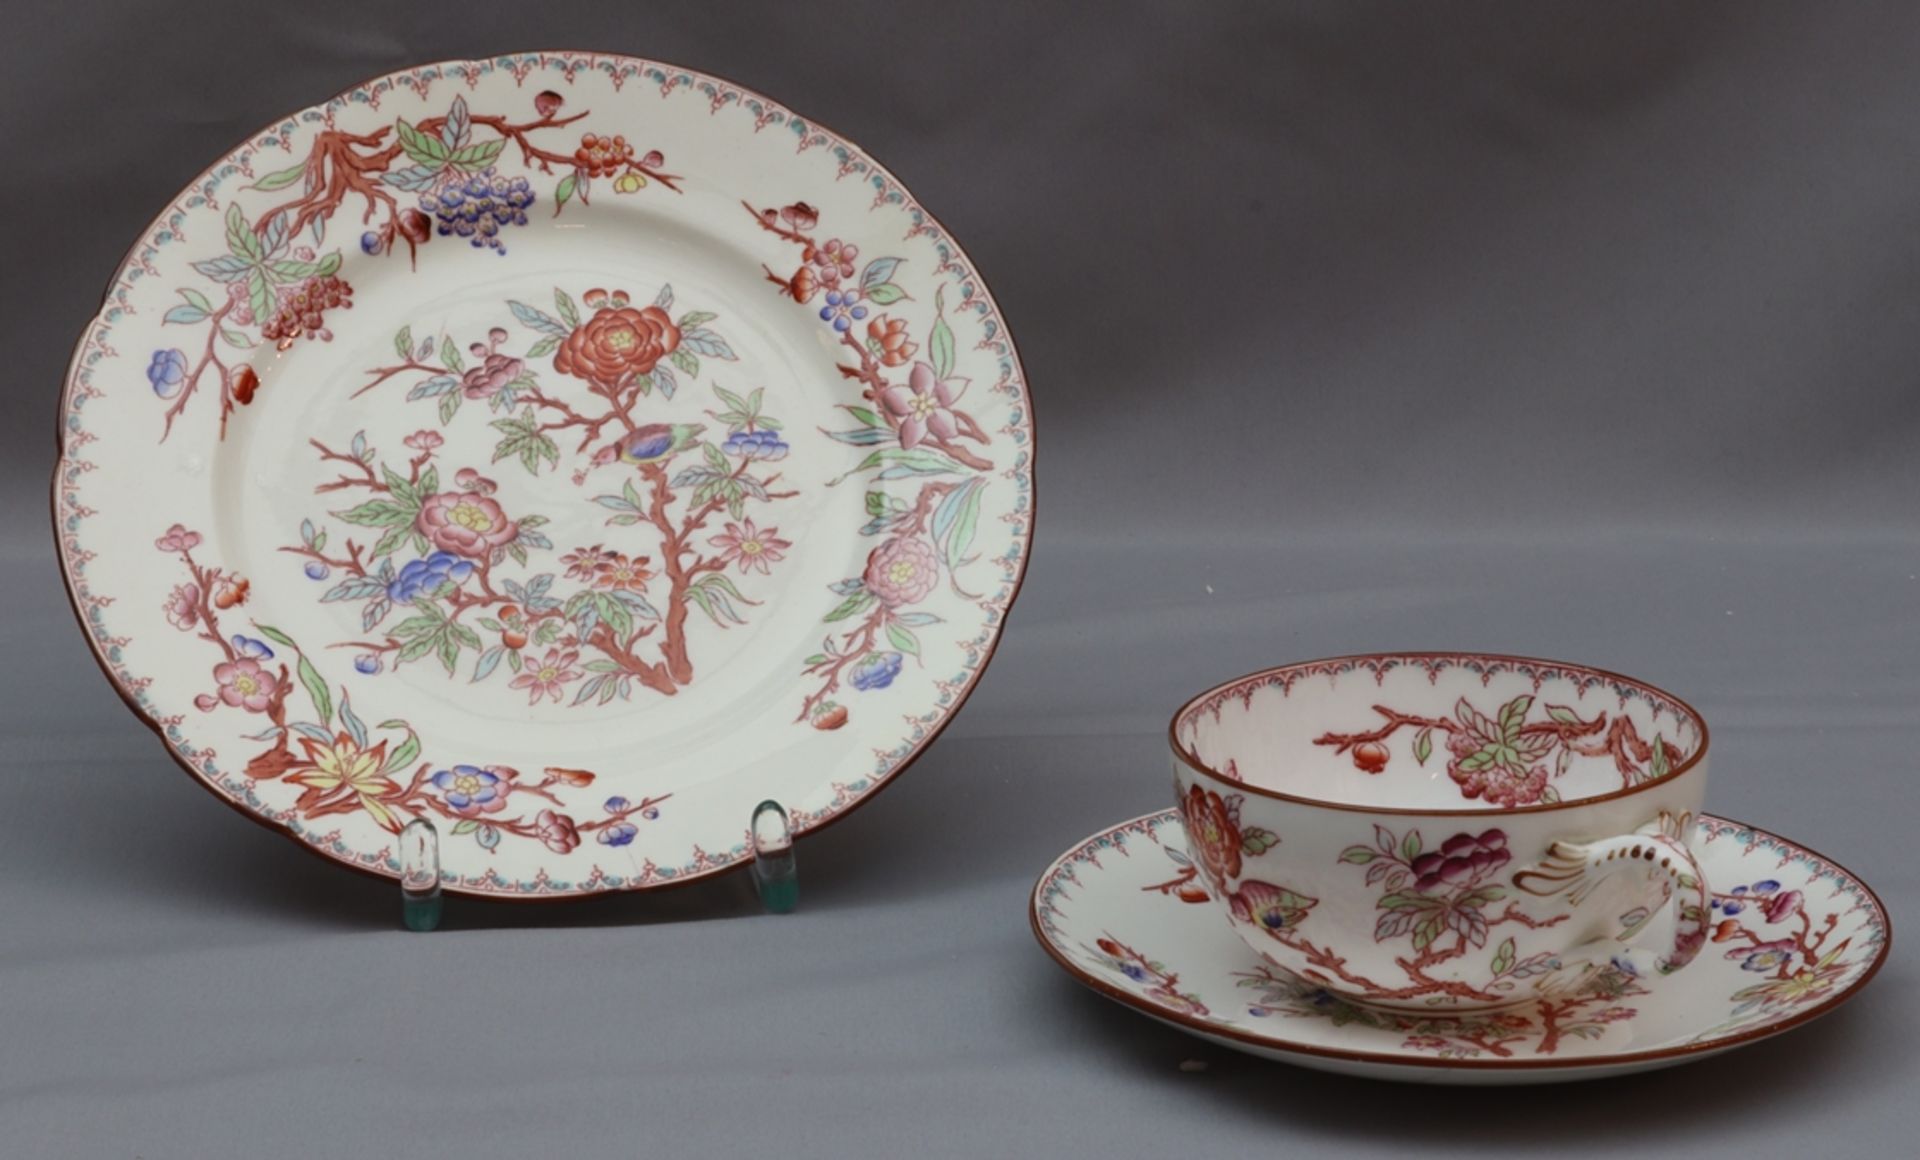 Three charming coffee sets, probably from France at the end of the 19th century.  - Image 3 of 3